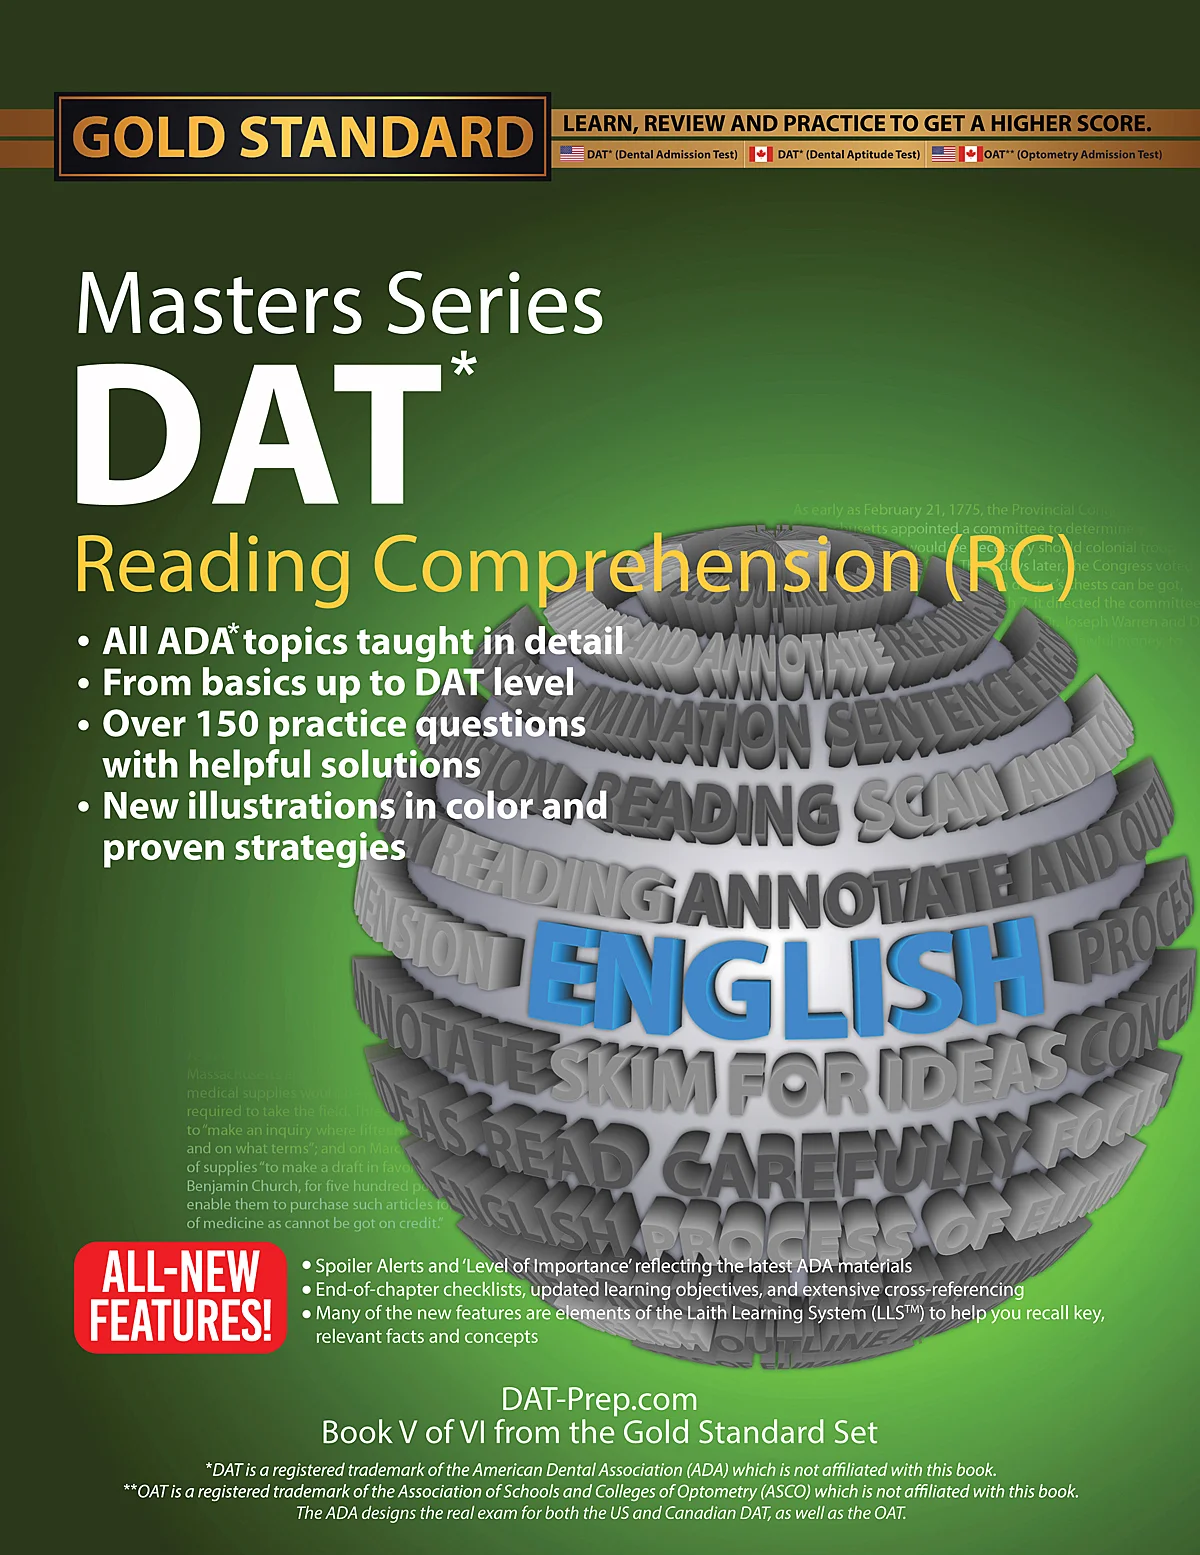 DAT MasterSeries Reading Comprehension (RC)